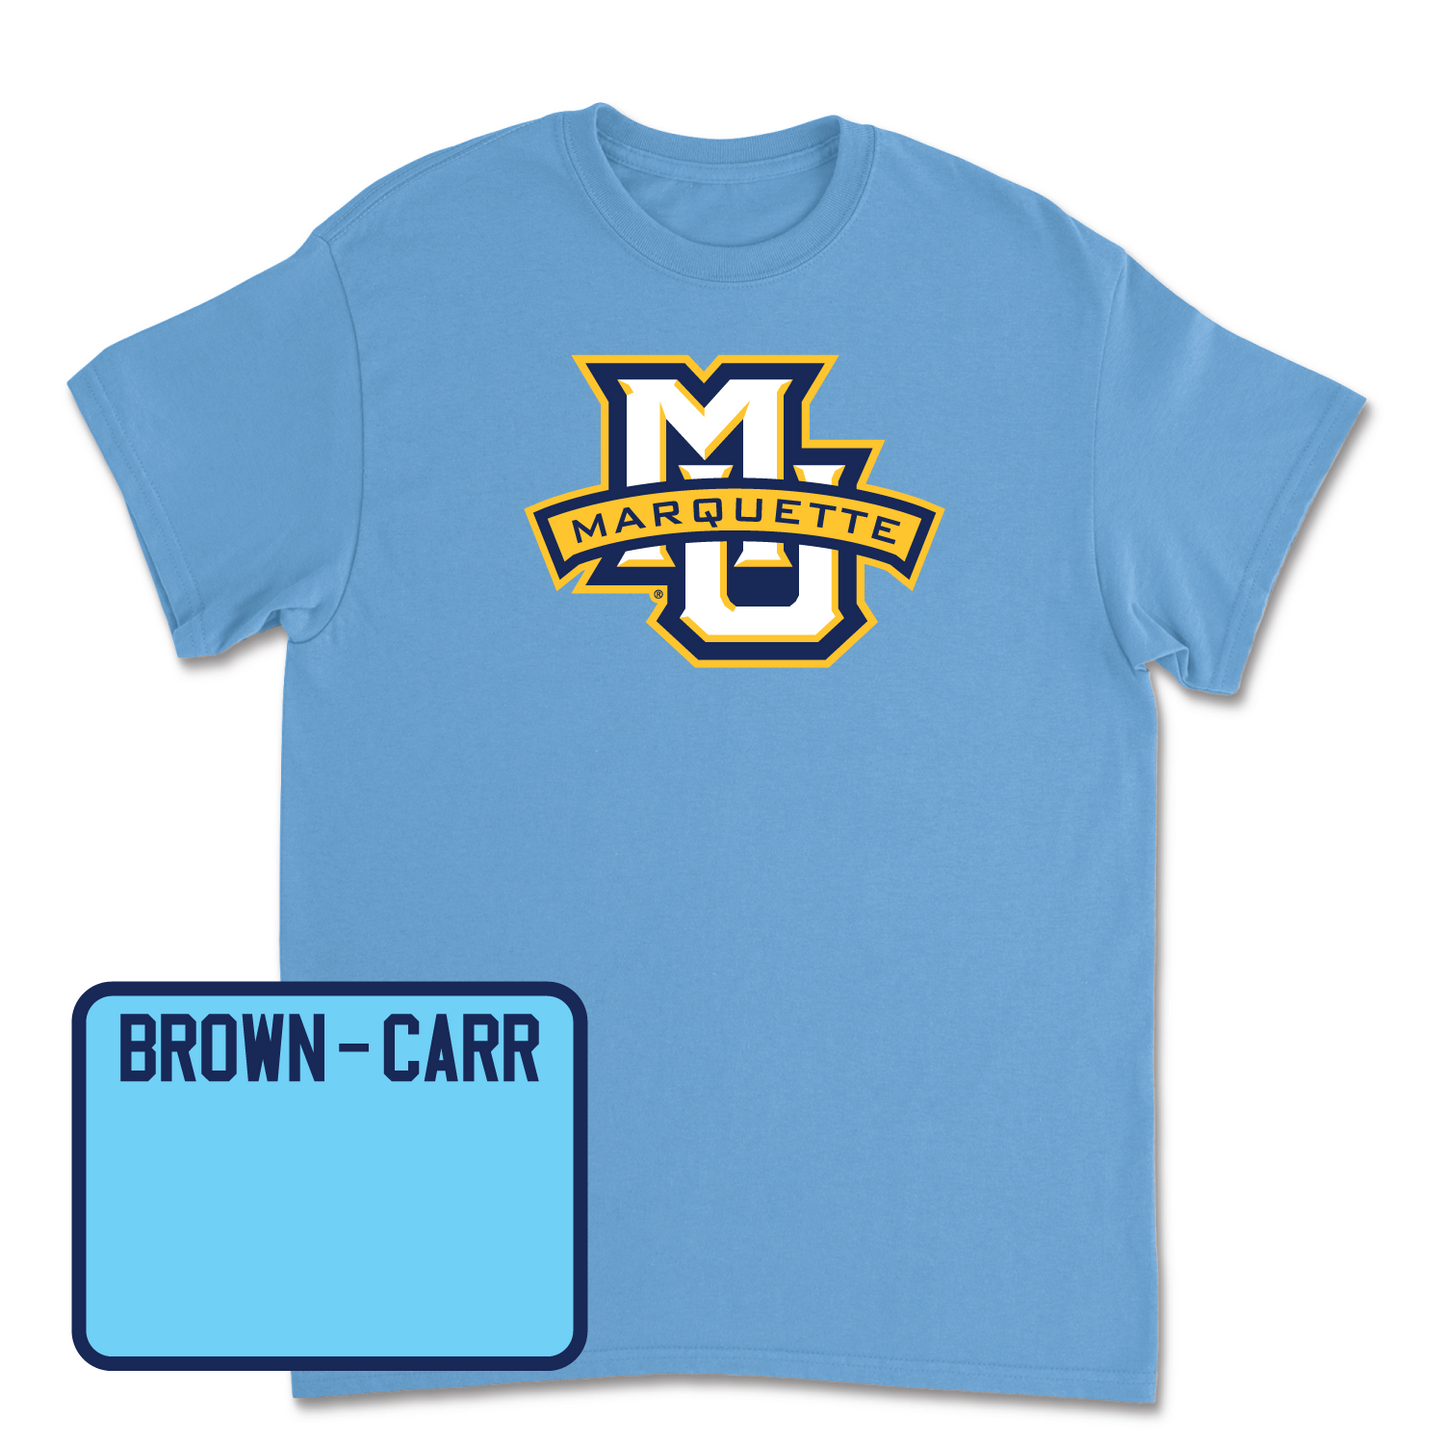 Championship Blue Track & Field Marquette Tee 2 Large / Siani Brown-Carr